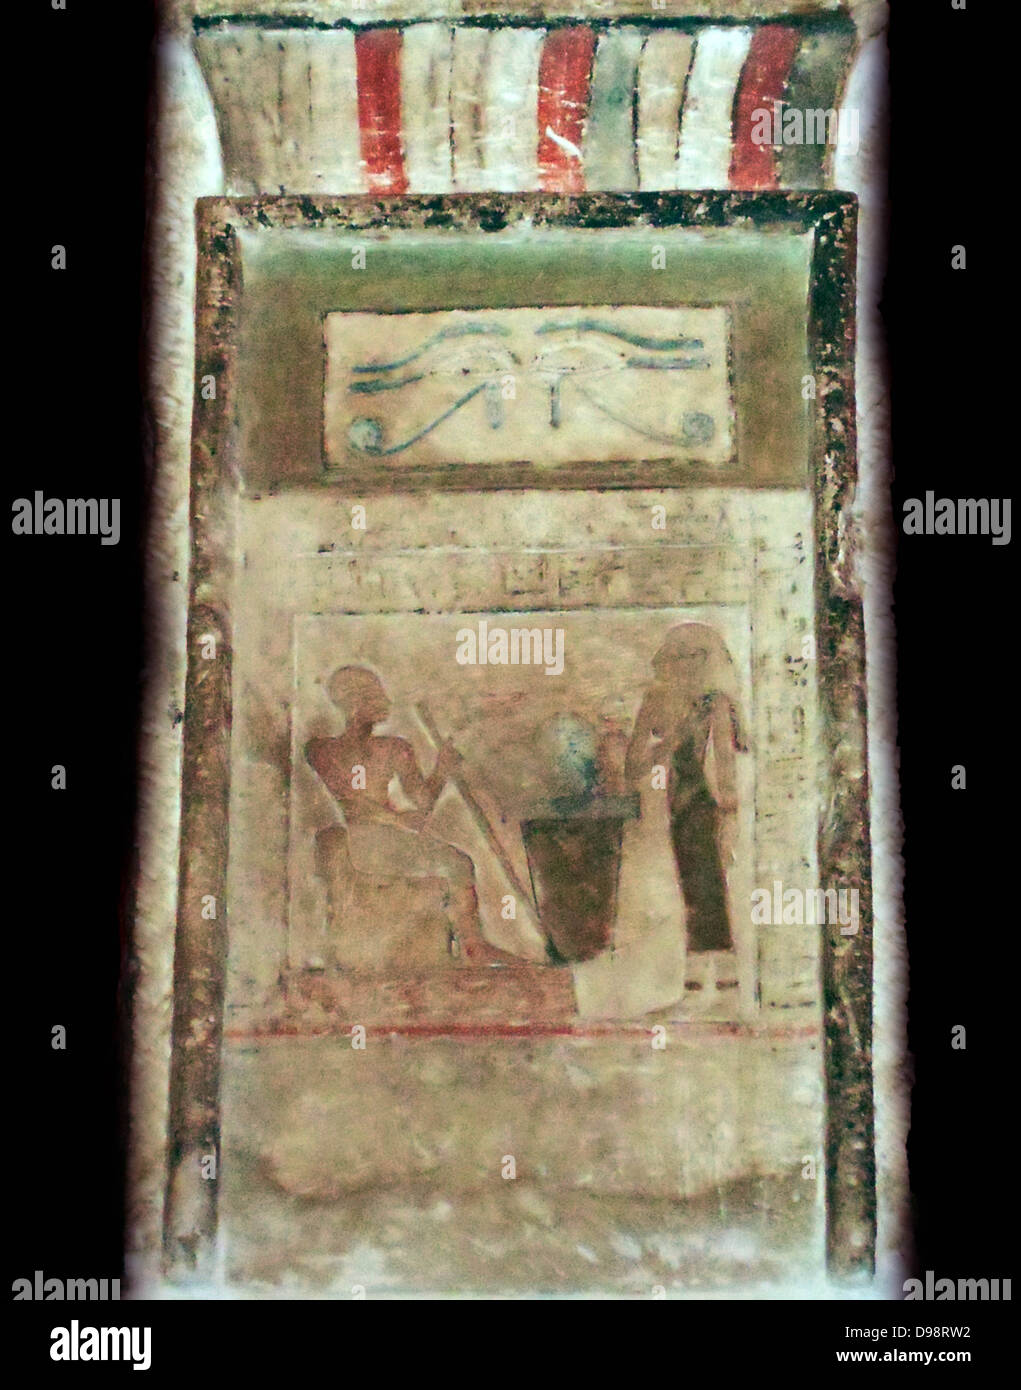 Stele of Imenyseneb (2123-2040 BC), Egyptian painted limestone section from a Stella (stele). Imenyseneb is served by his wife under the protective symbol of the Wedjet eye. Imenyseneb was chief of expeditions for the royal court of the Pharaoh. Stock Photo